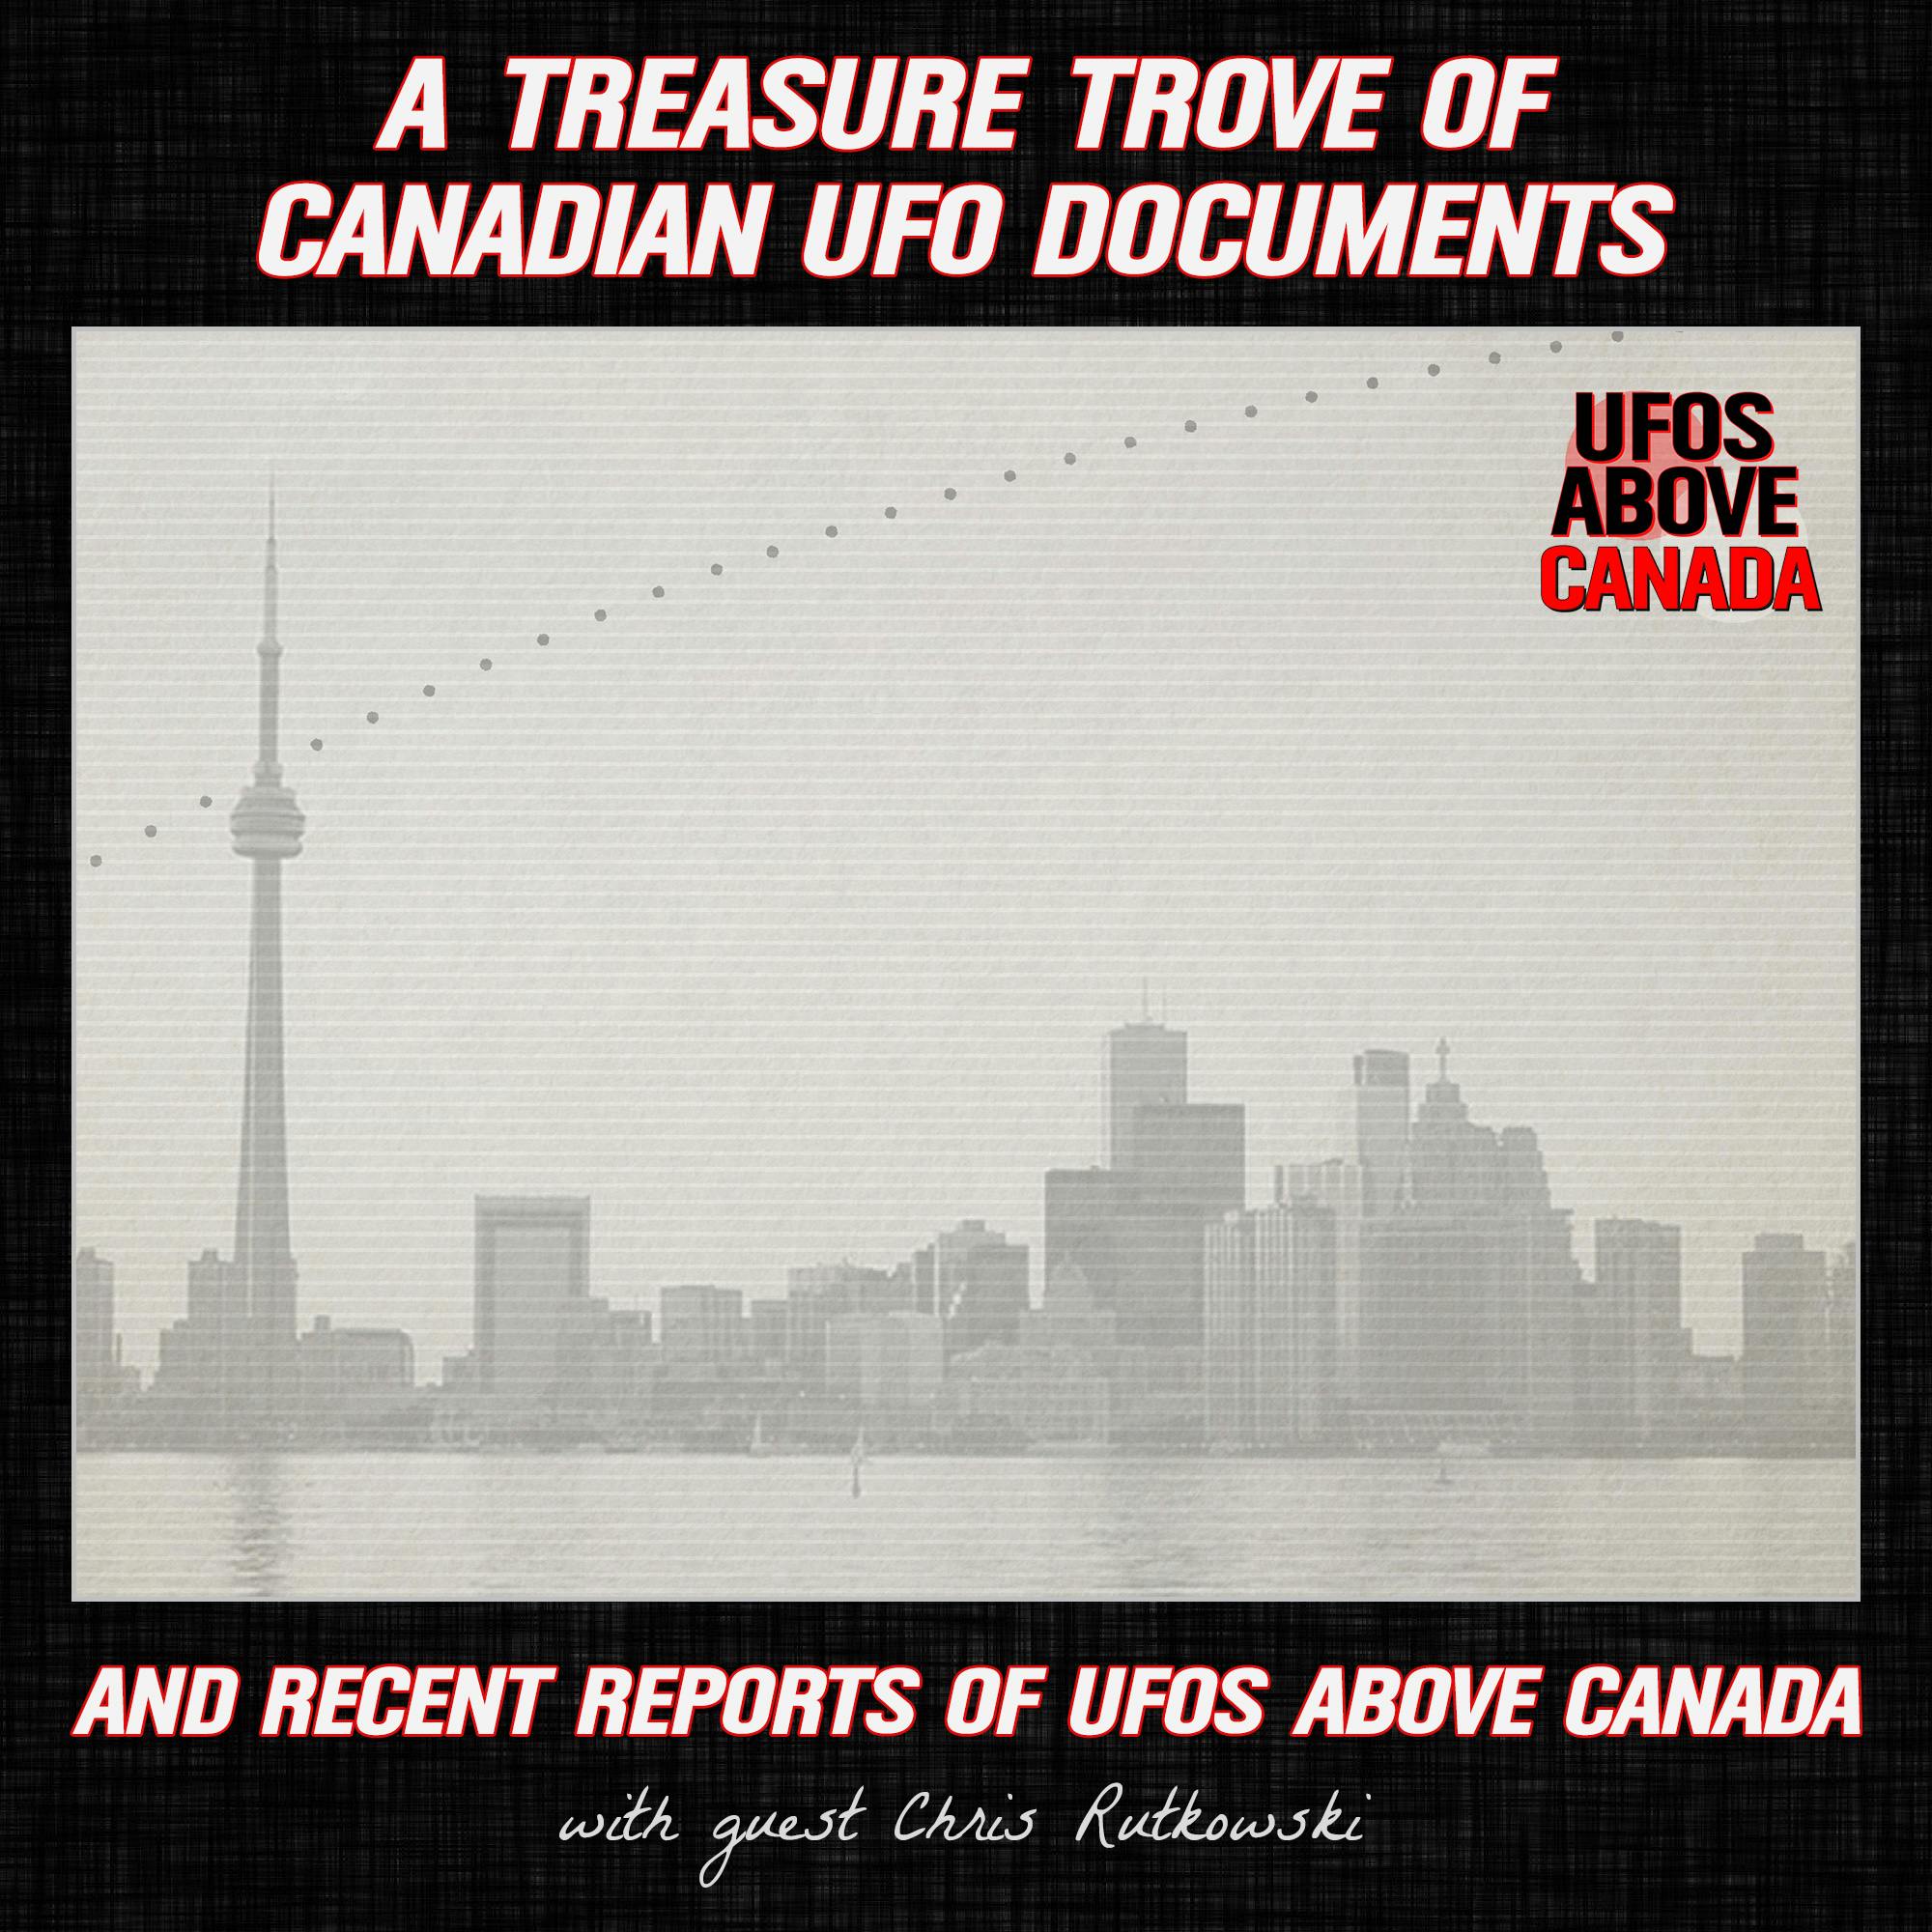 UFOs Above Canada - Discussing a treasure trove of government UFO documents and recent Canadian UFO reports